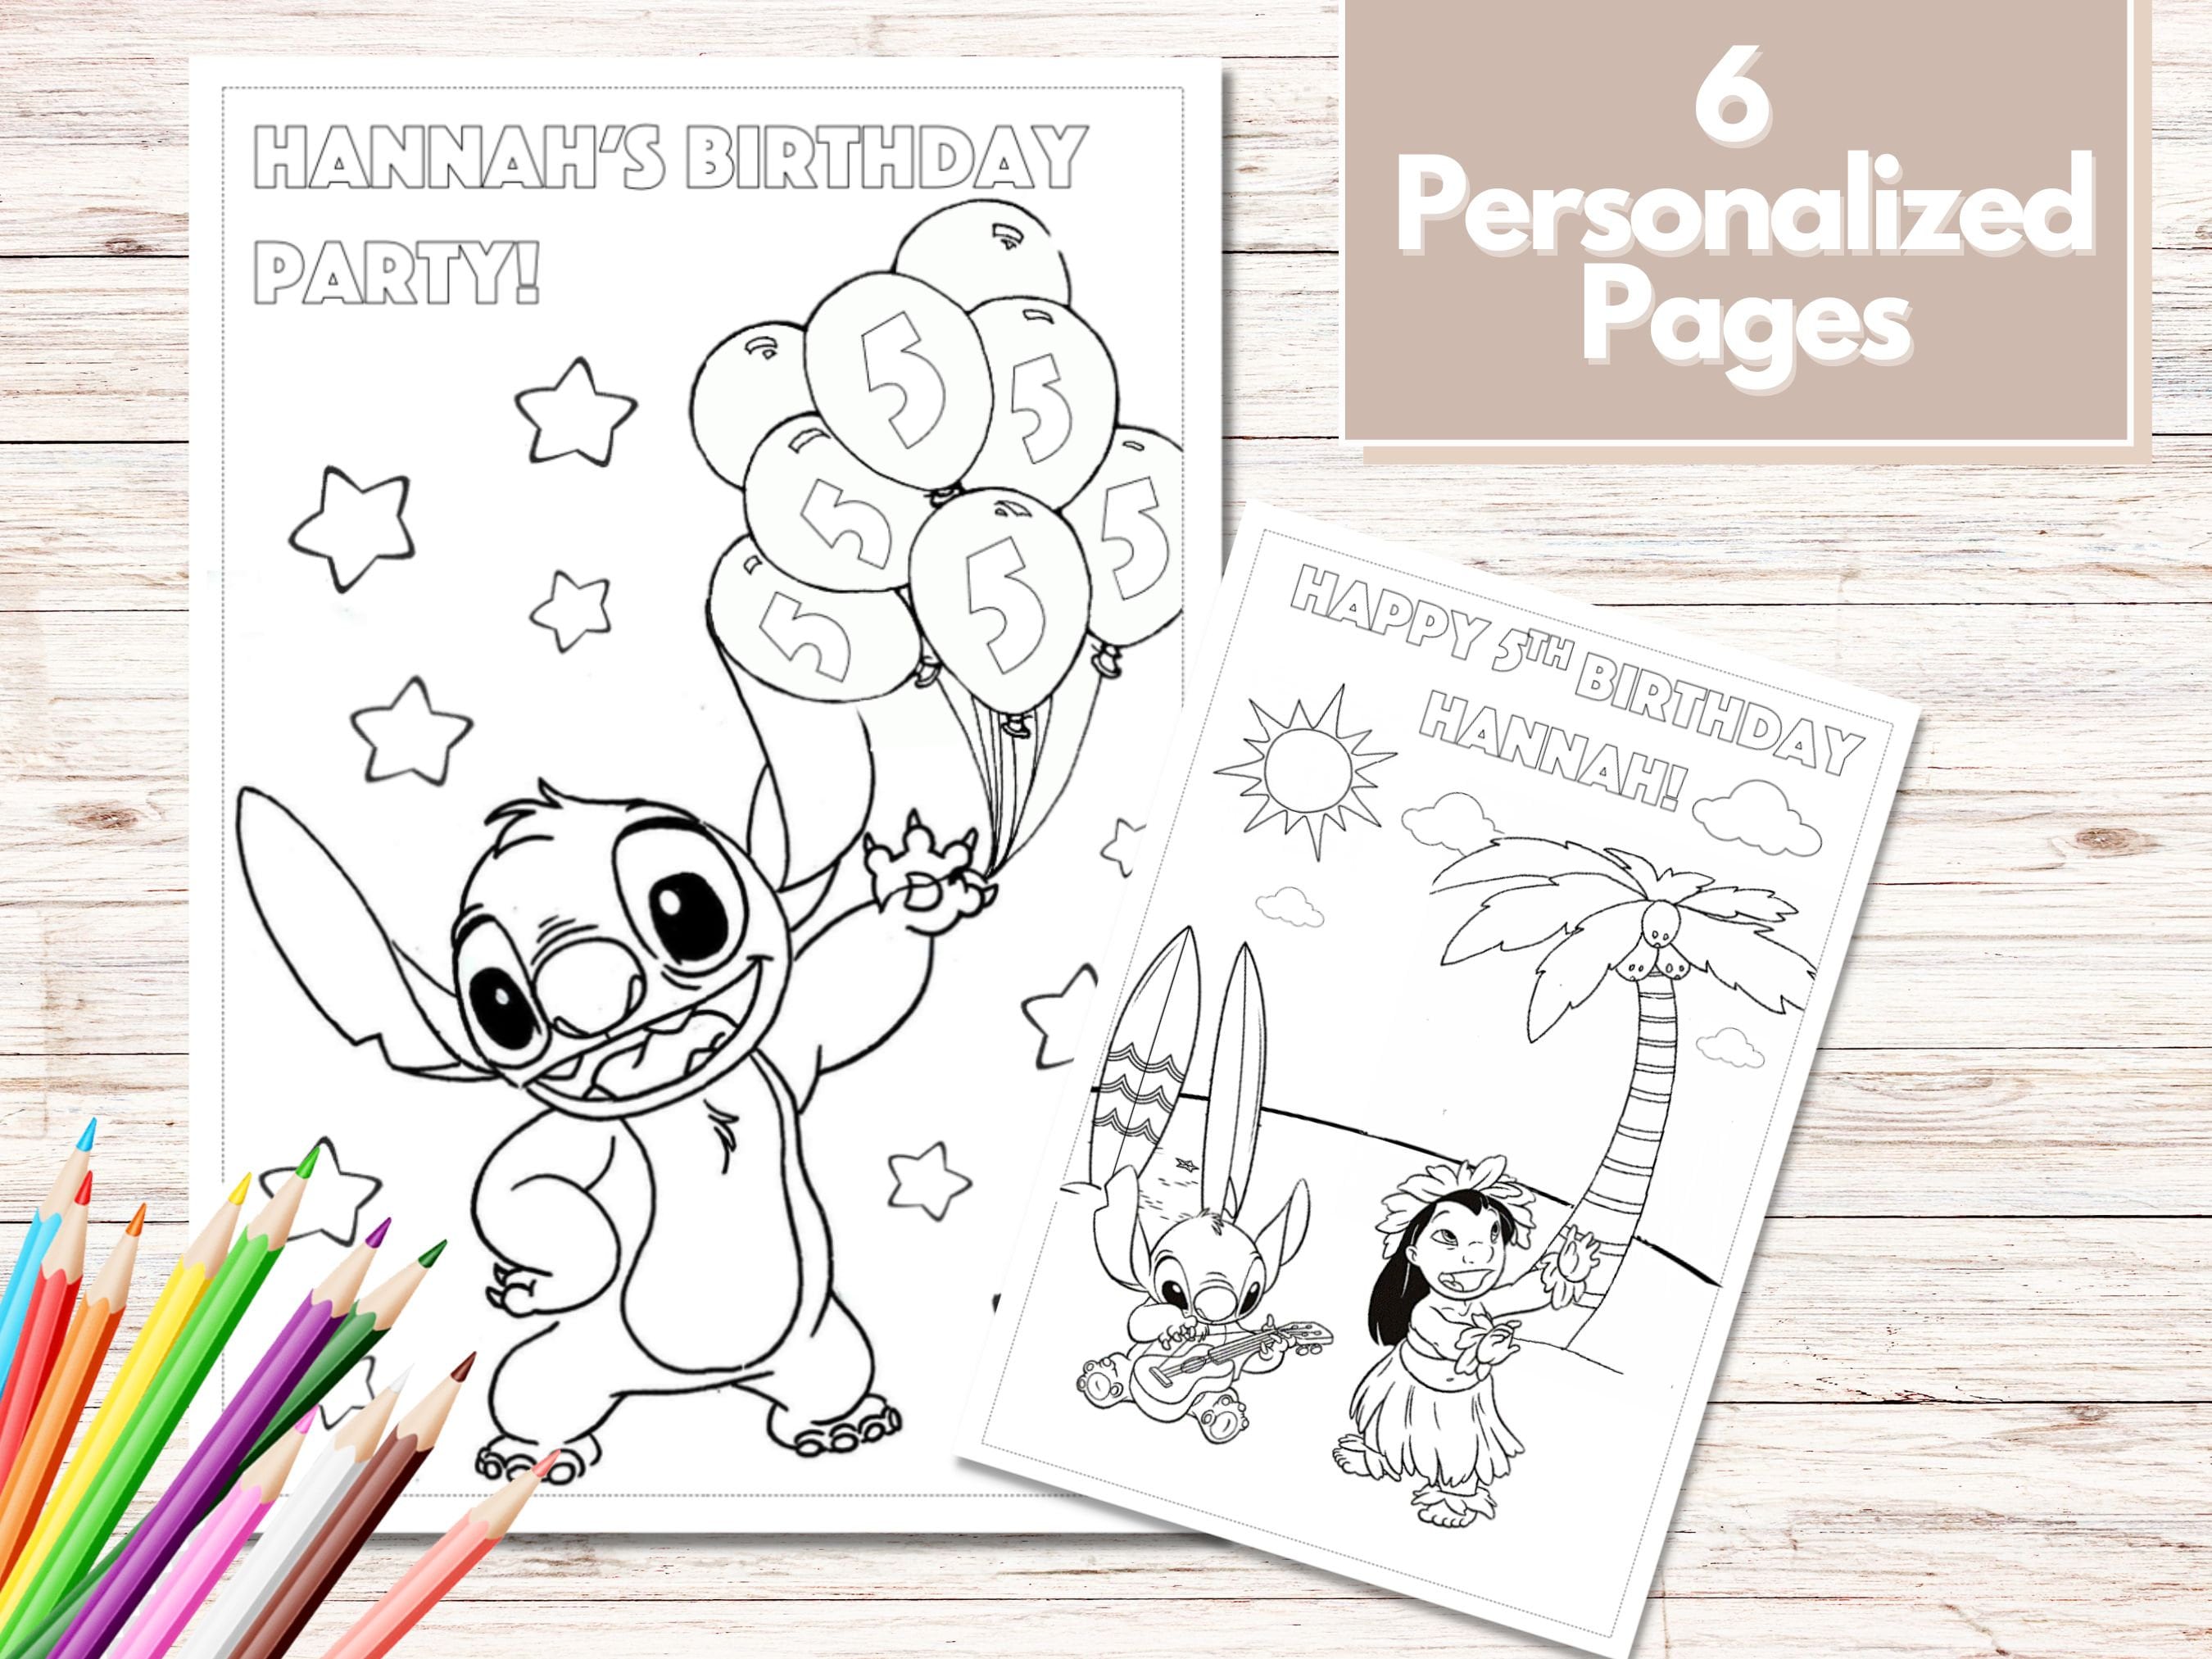 Lilo & Stitch coloring pages - Coloring pages for kids - disney coloring  pages - printable coloring pages - color pages - kids coloring pages -  coloring sheet - coloring page - coloring book - cartoon coloring pages